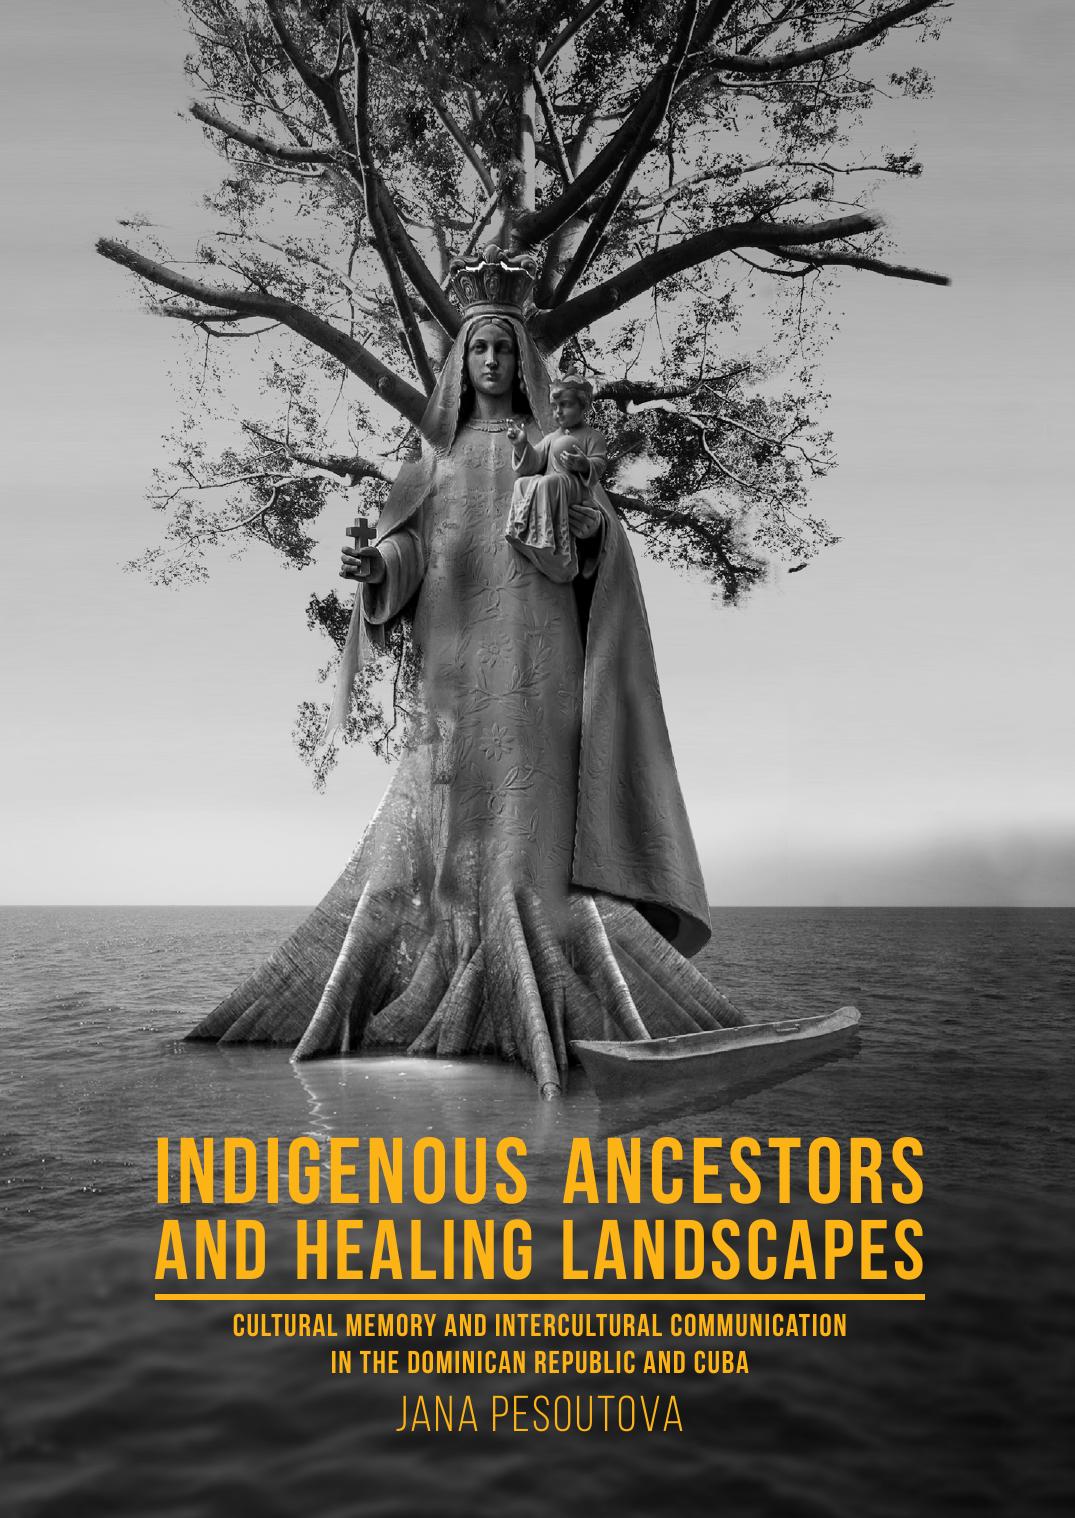 Indigenous Ancestors and Healing Landscapes: Cultural Memory and Intercultural Communication in the Dominican Republic and Cuba by Jana Pesoutová